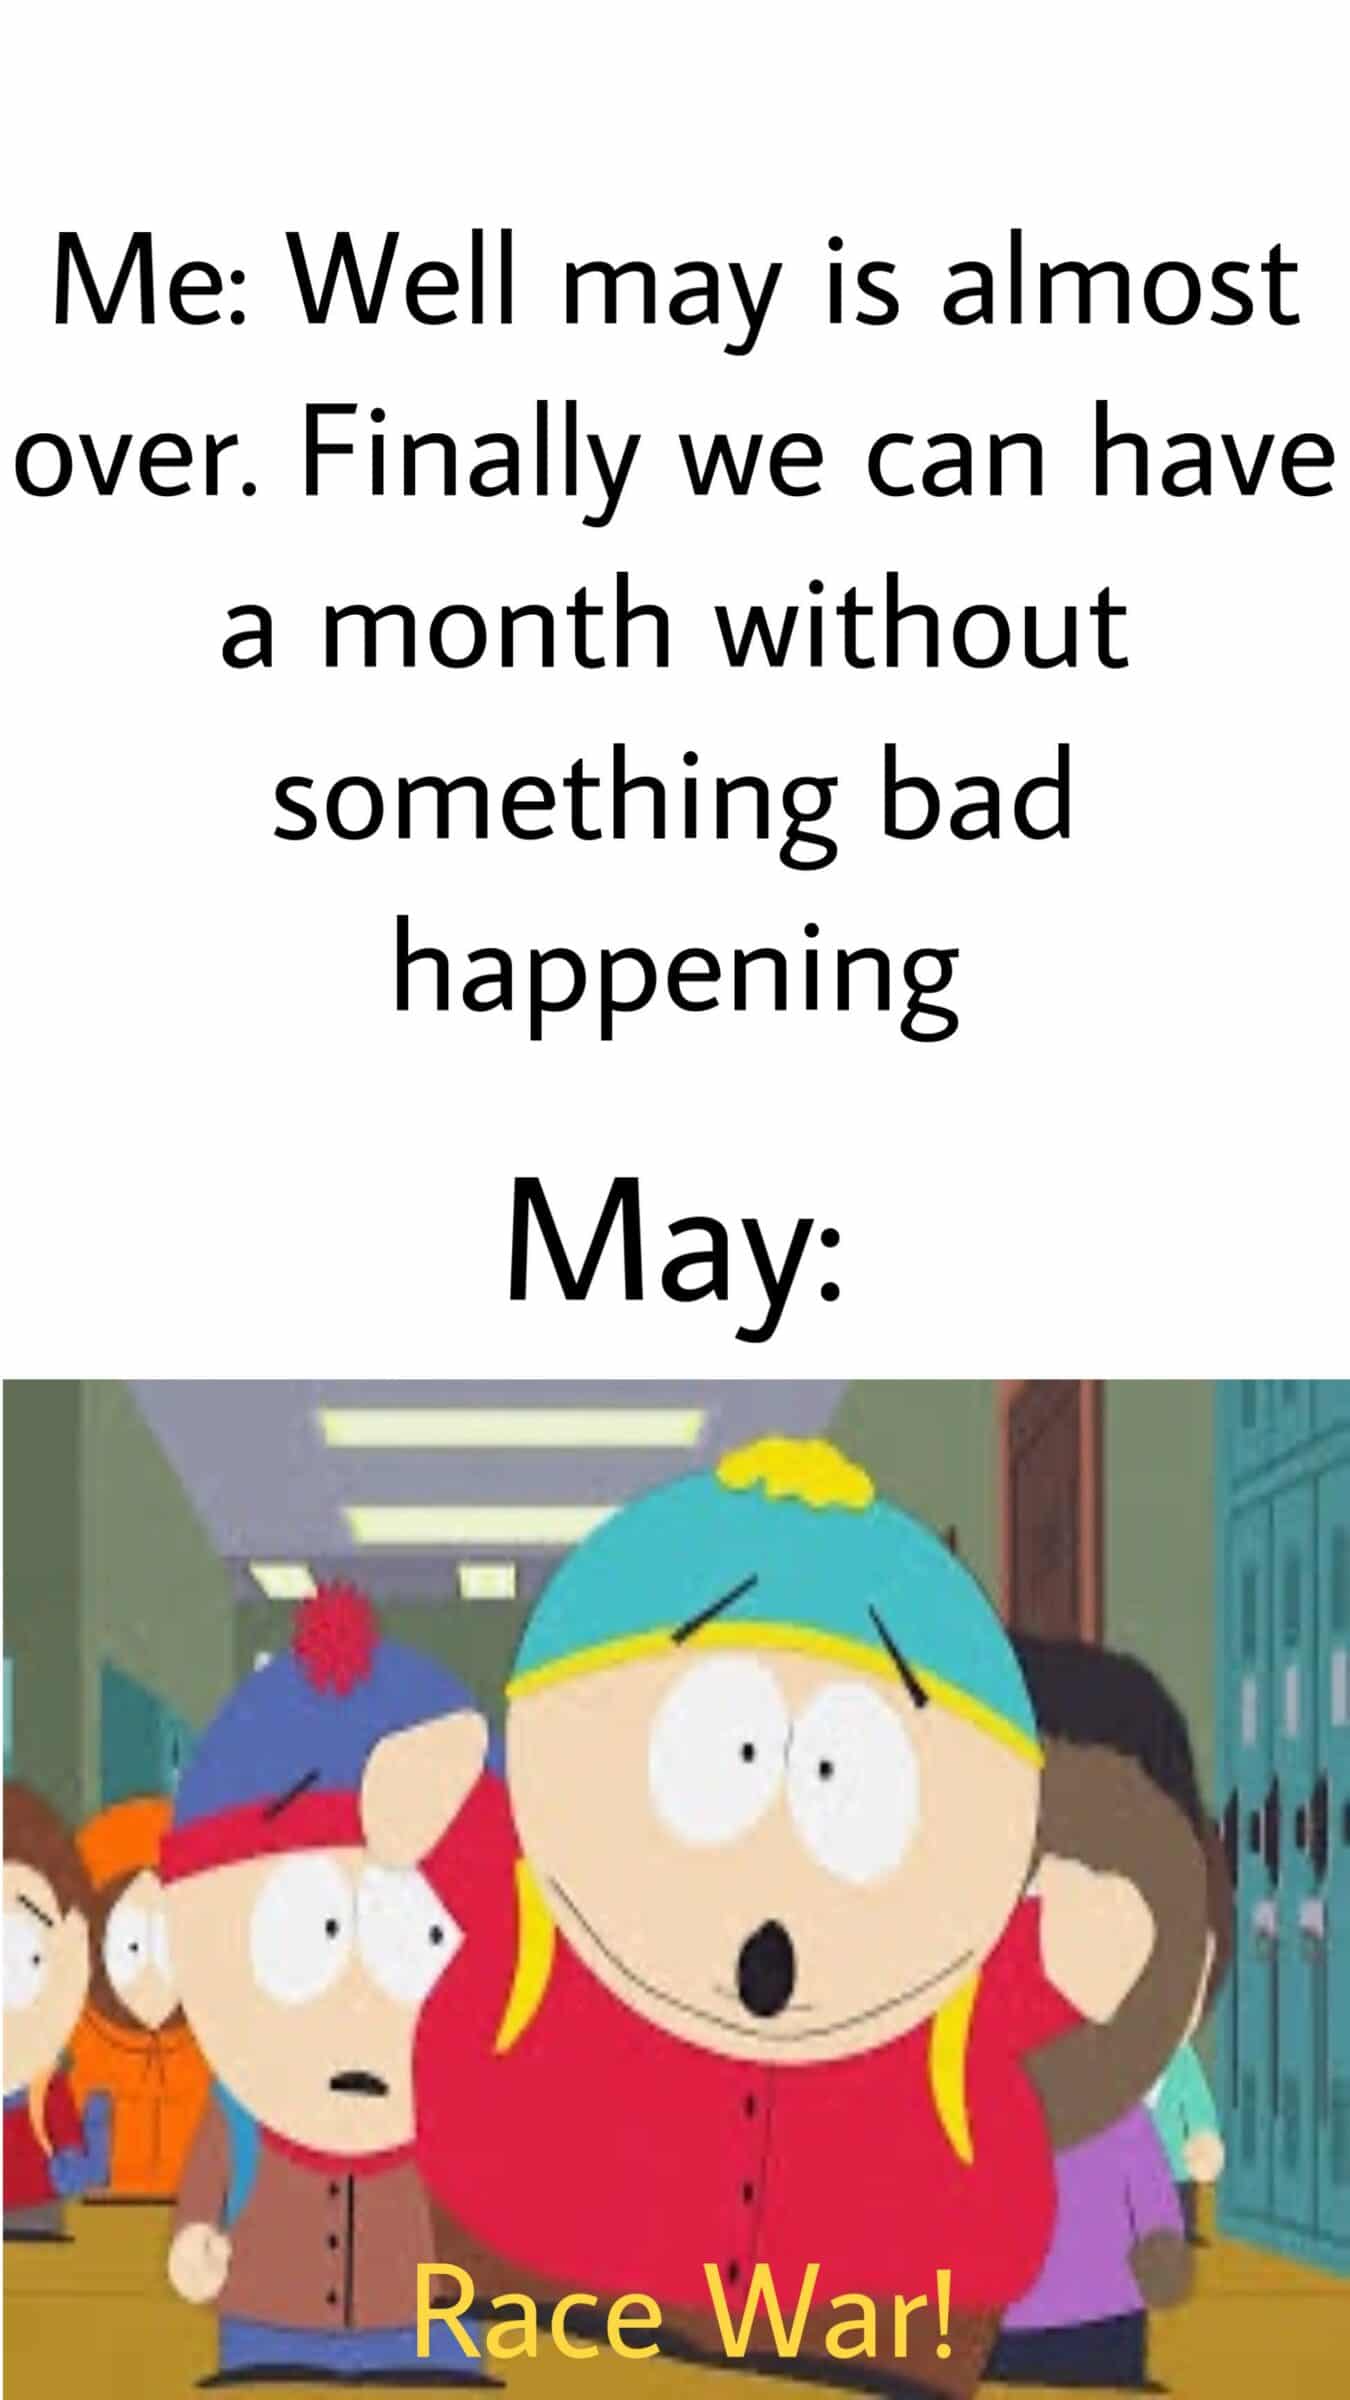 Dank, Minneapolis, India, China, April, USA Dank Memes Dank, Minneapolis, India, China, April, USA text: Me: Well may is almost over. Finally we can have a month without something bad happening May: Race War! 